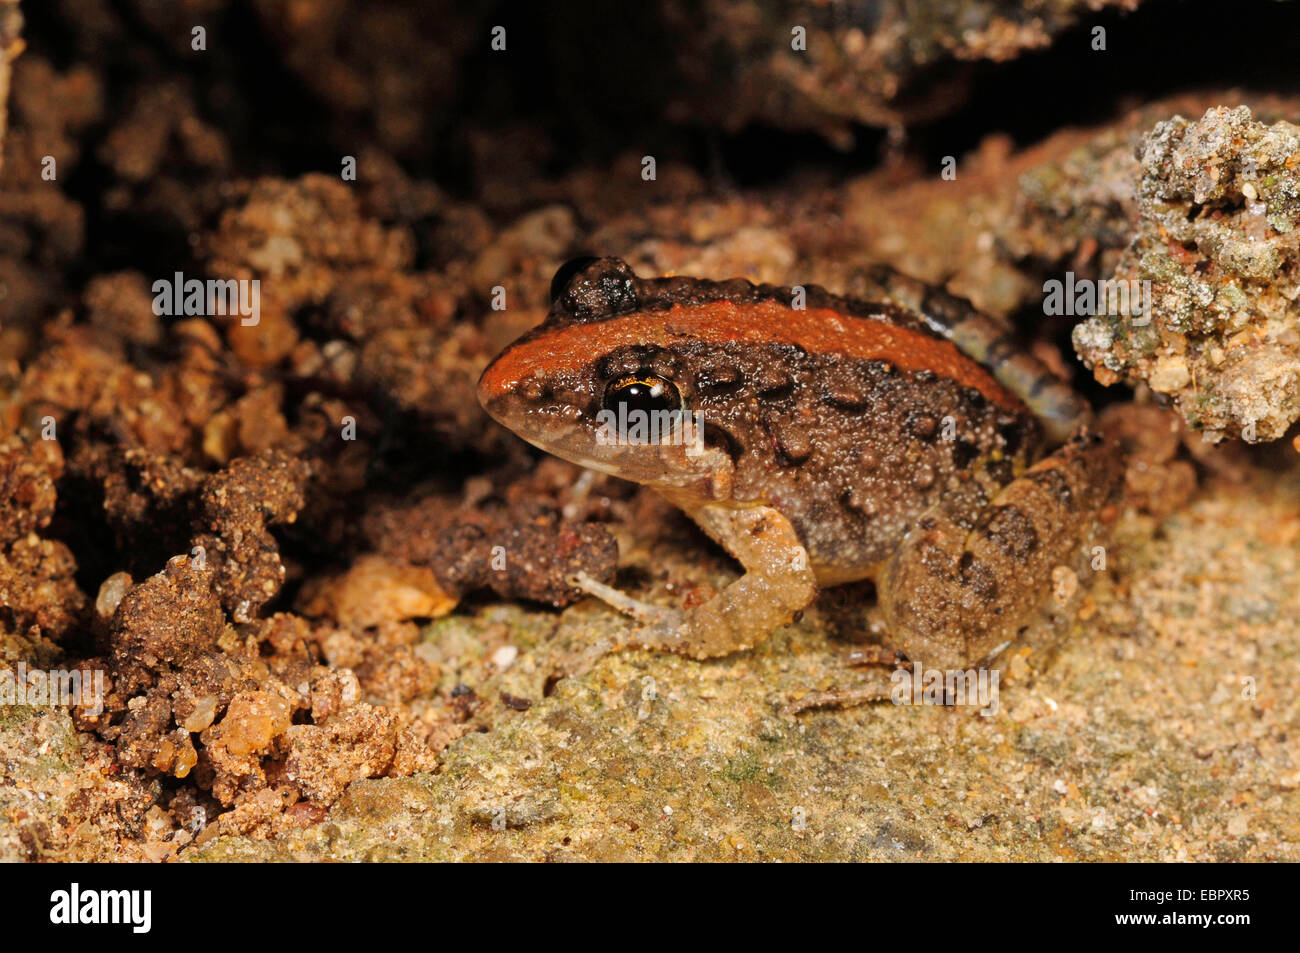 Fork-tongued frog (Euphlyctis cf. cyanophlyctis), sitting on a rock, Sri Lanka, Sinharaja Forest National Park Stock Photo